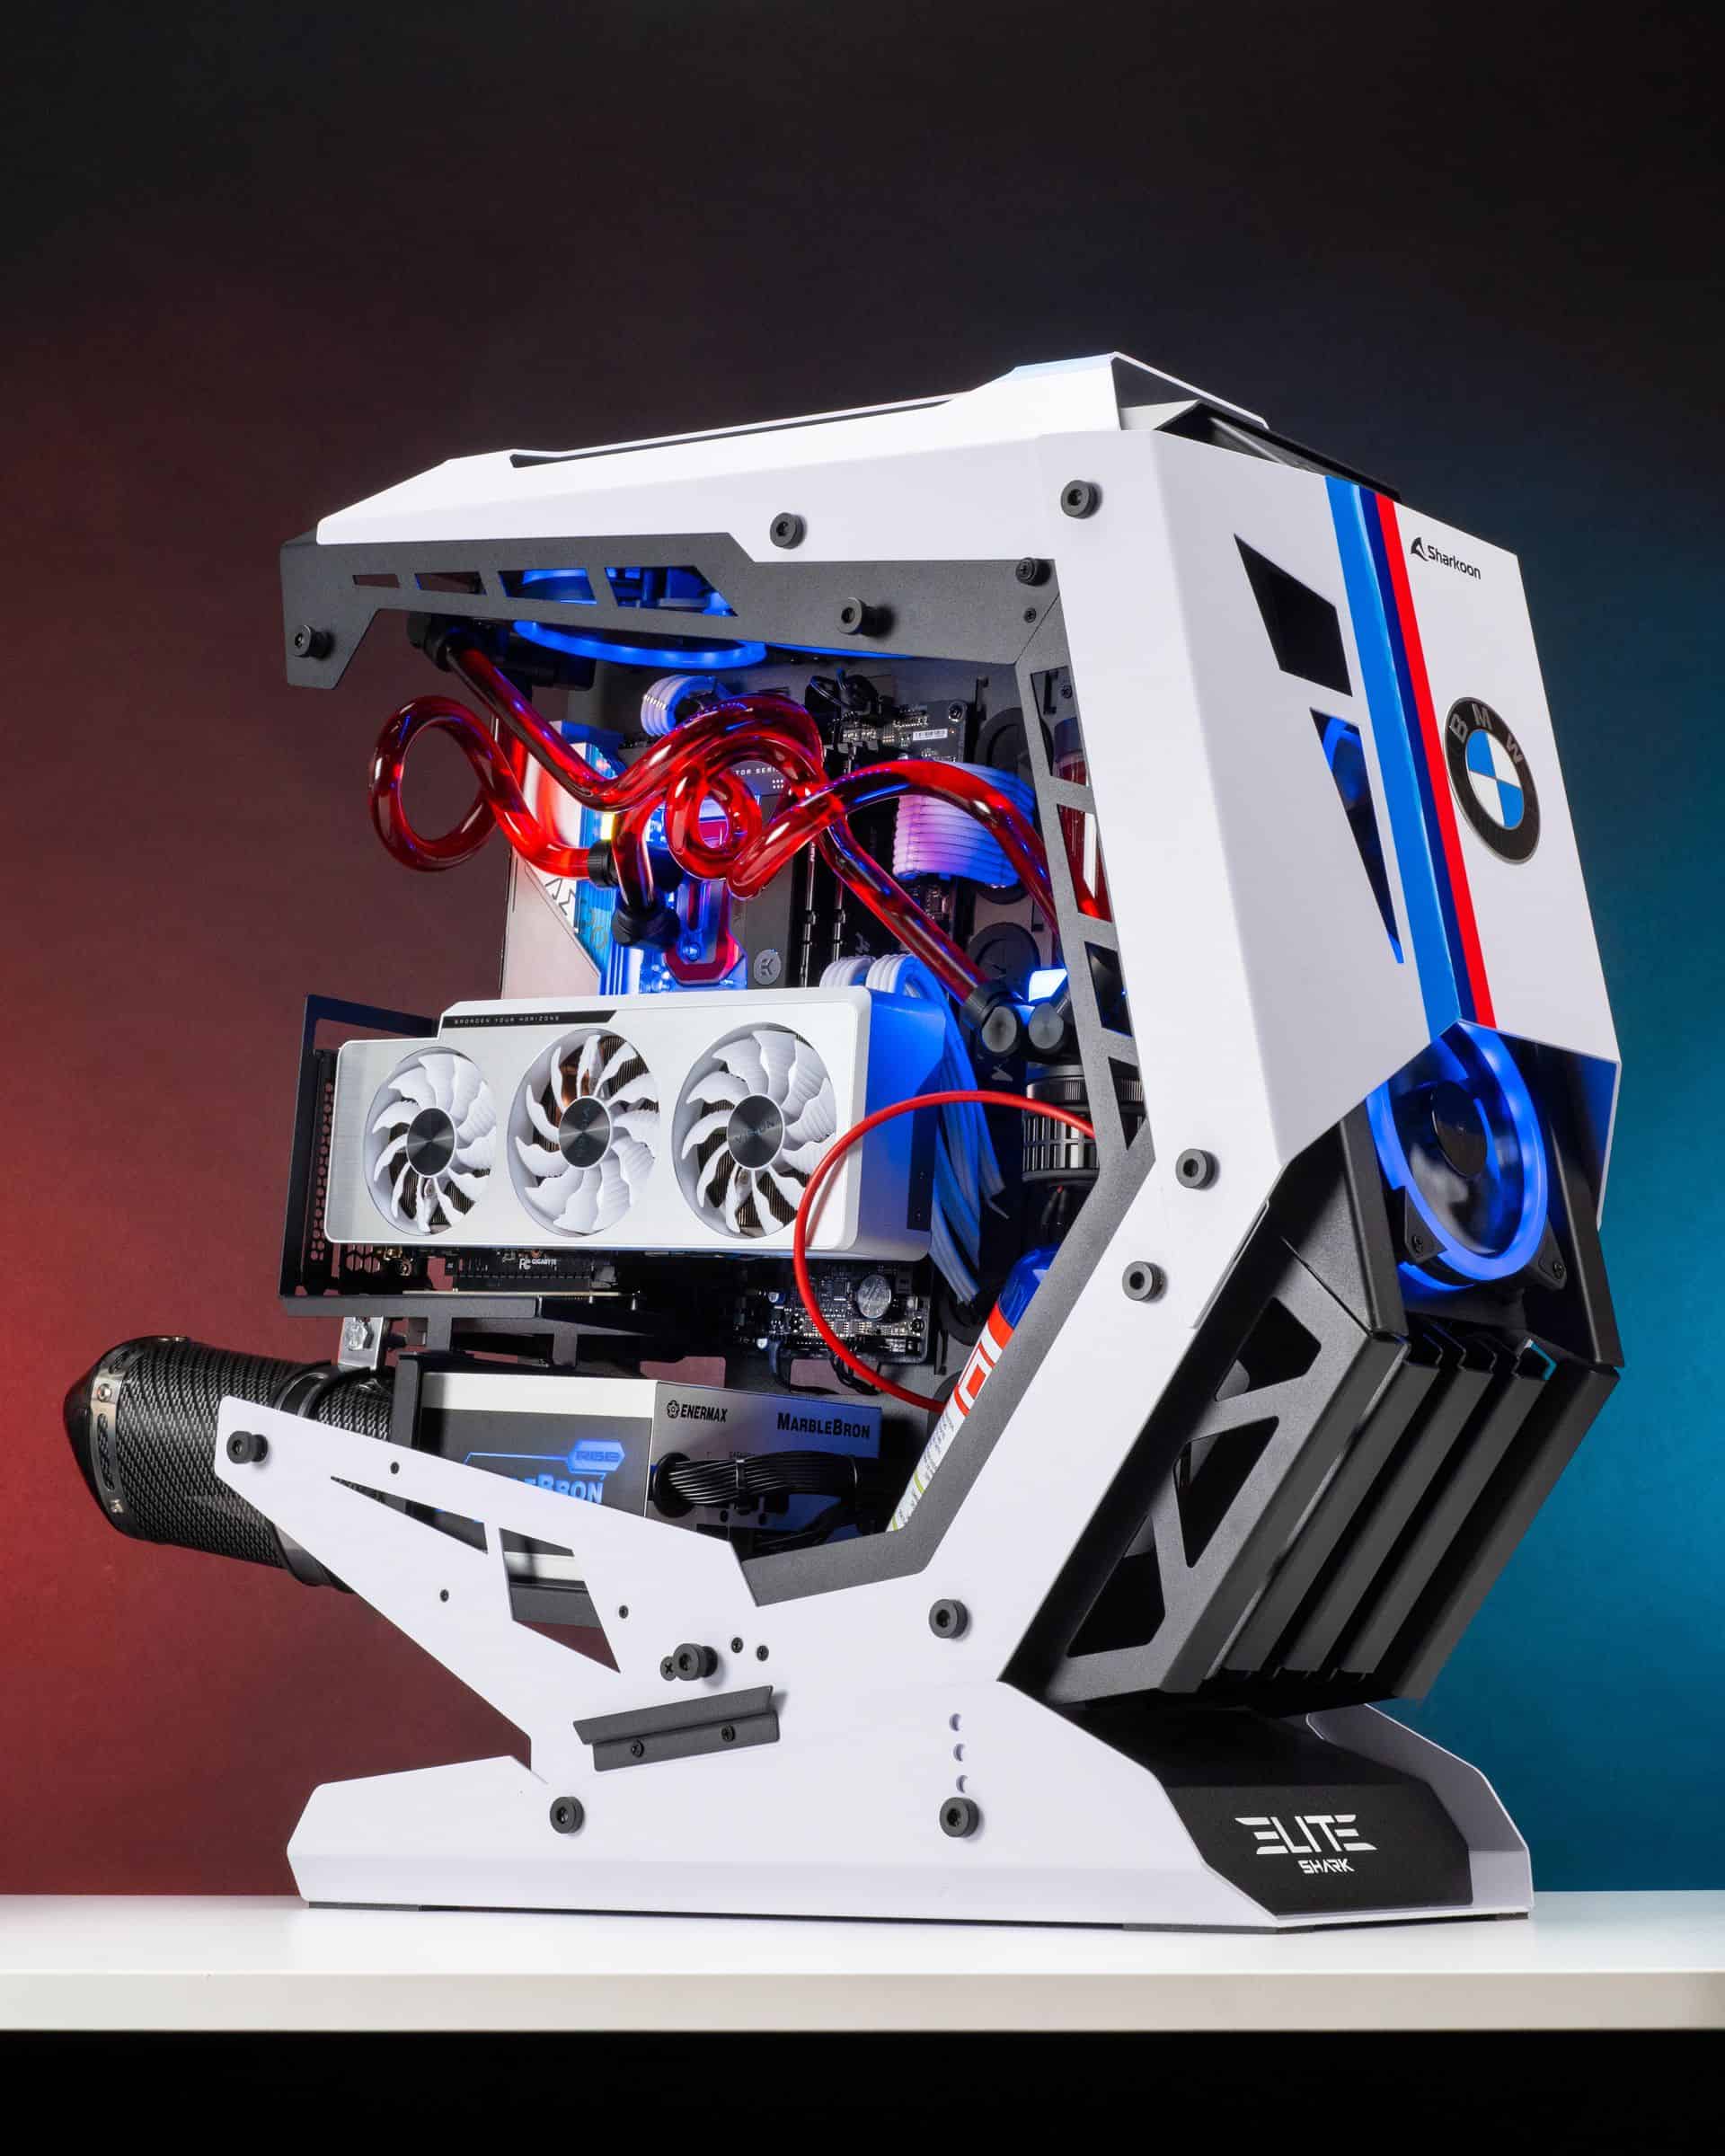 PC Case Looks Like a Motorcycle